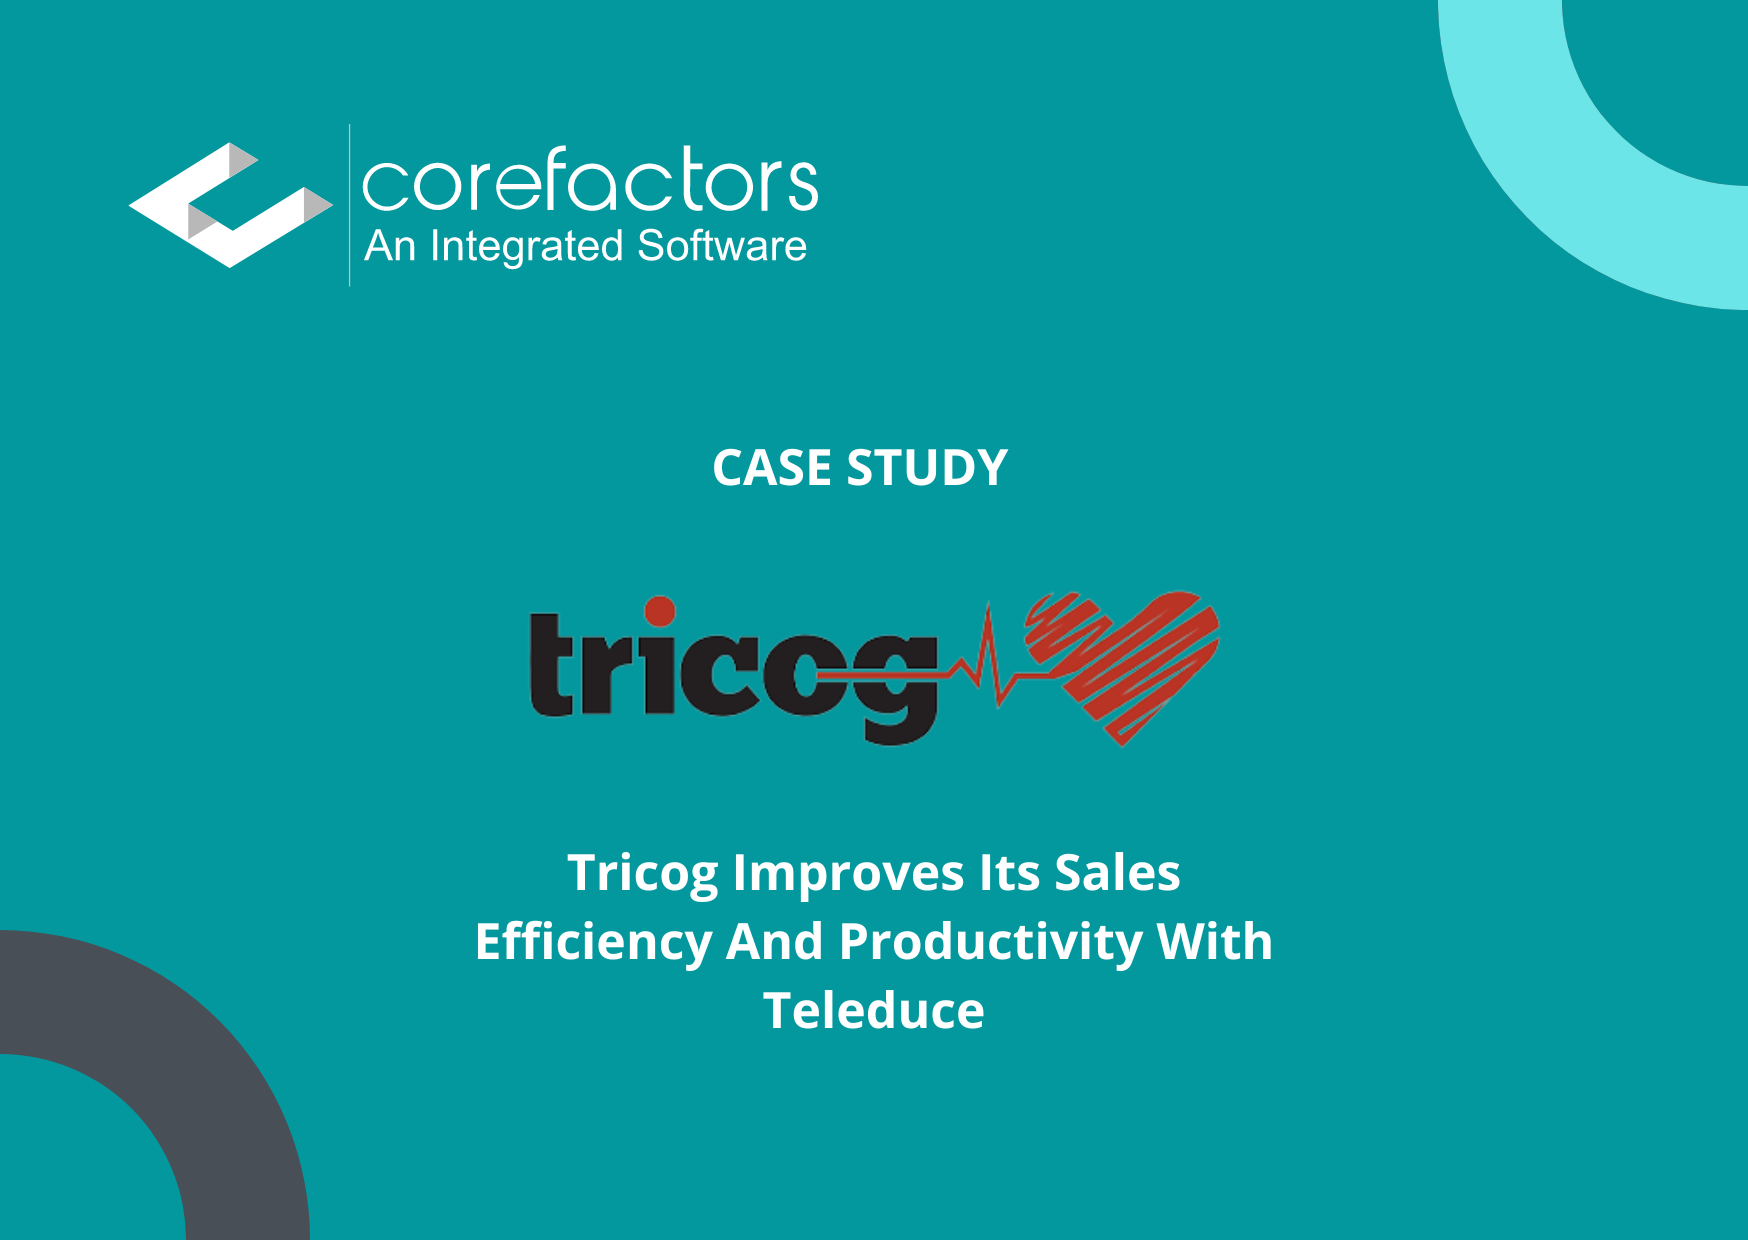 How Tricog Improves Its Sales Efficiency And Productivity With Teleduce